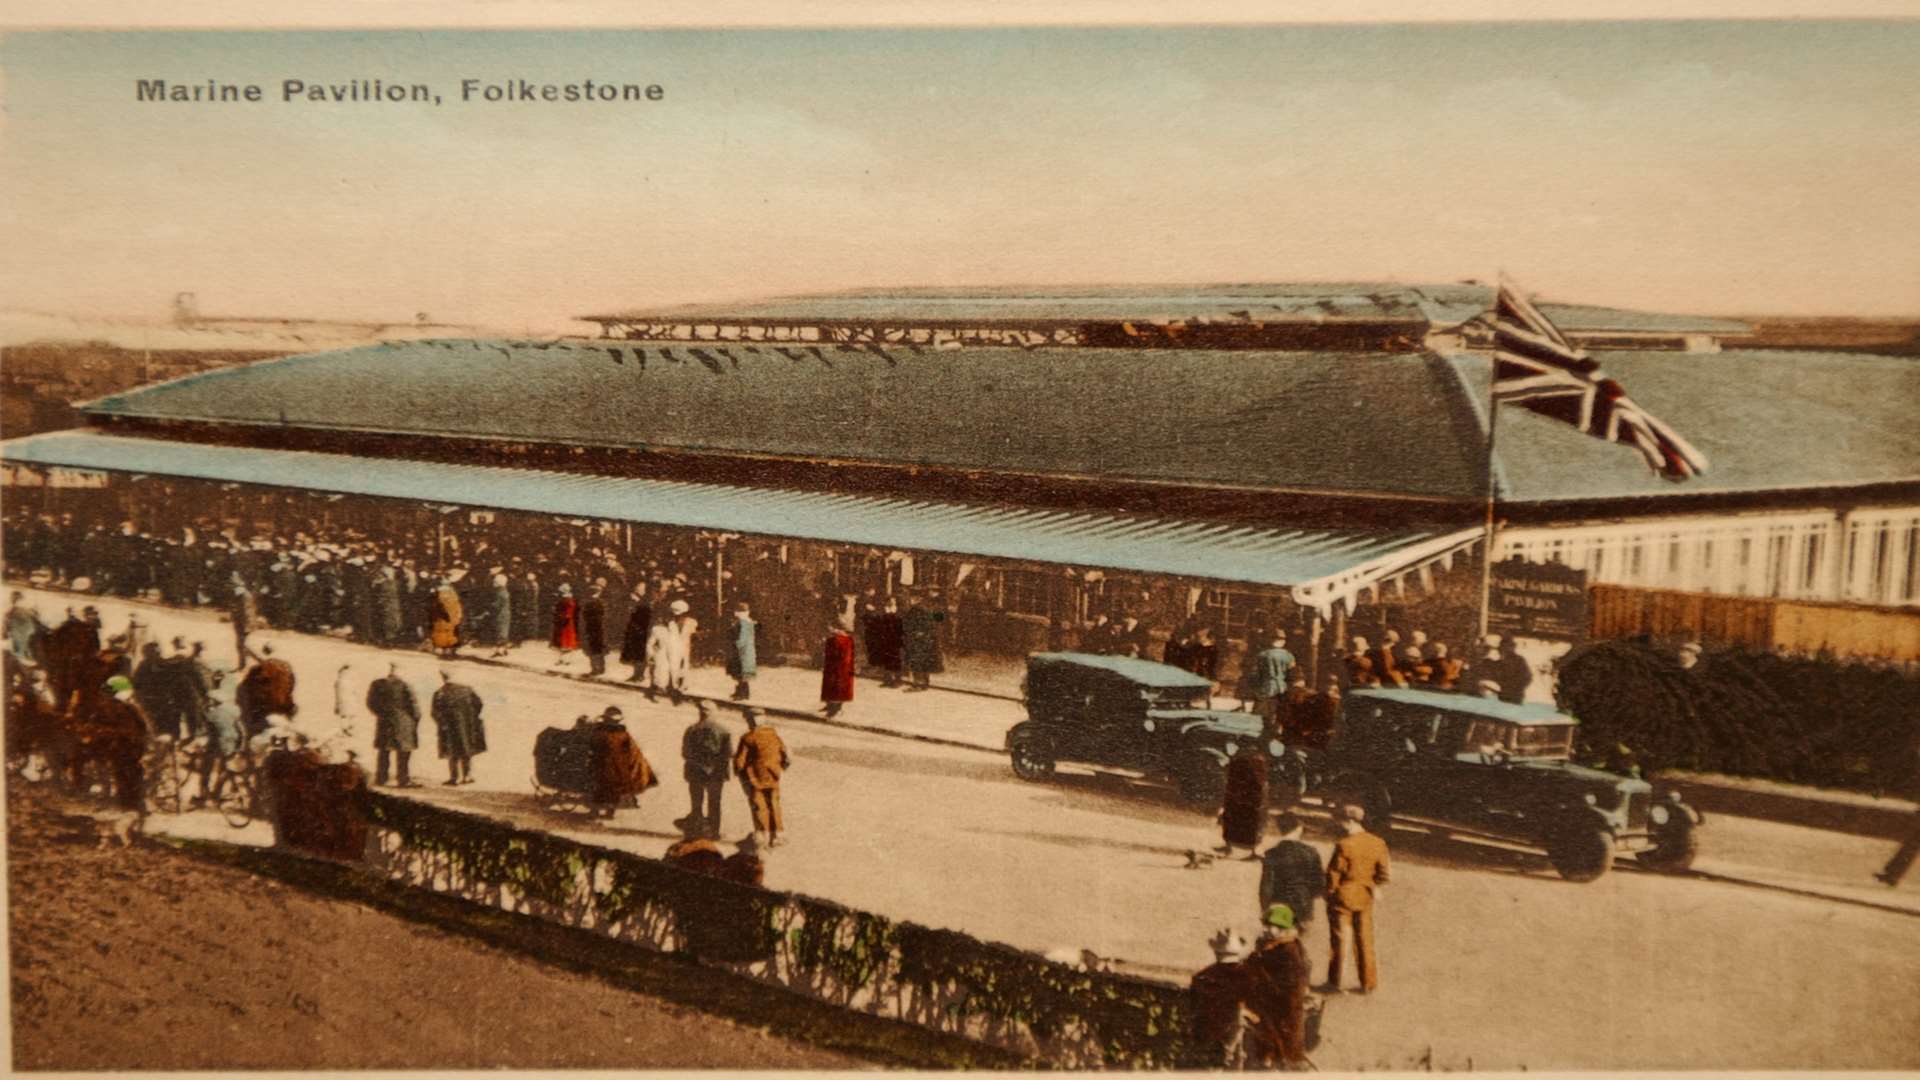 A postcard of the Marine Pavilion showing it during its heyday